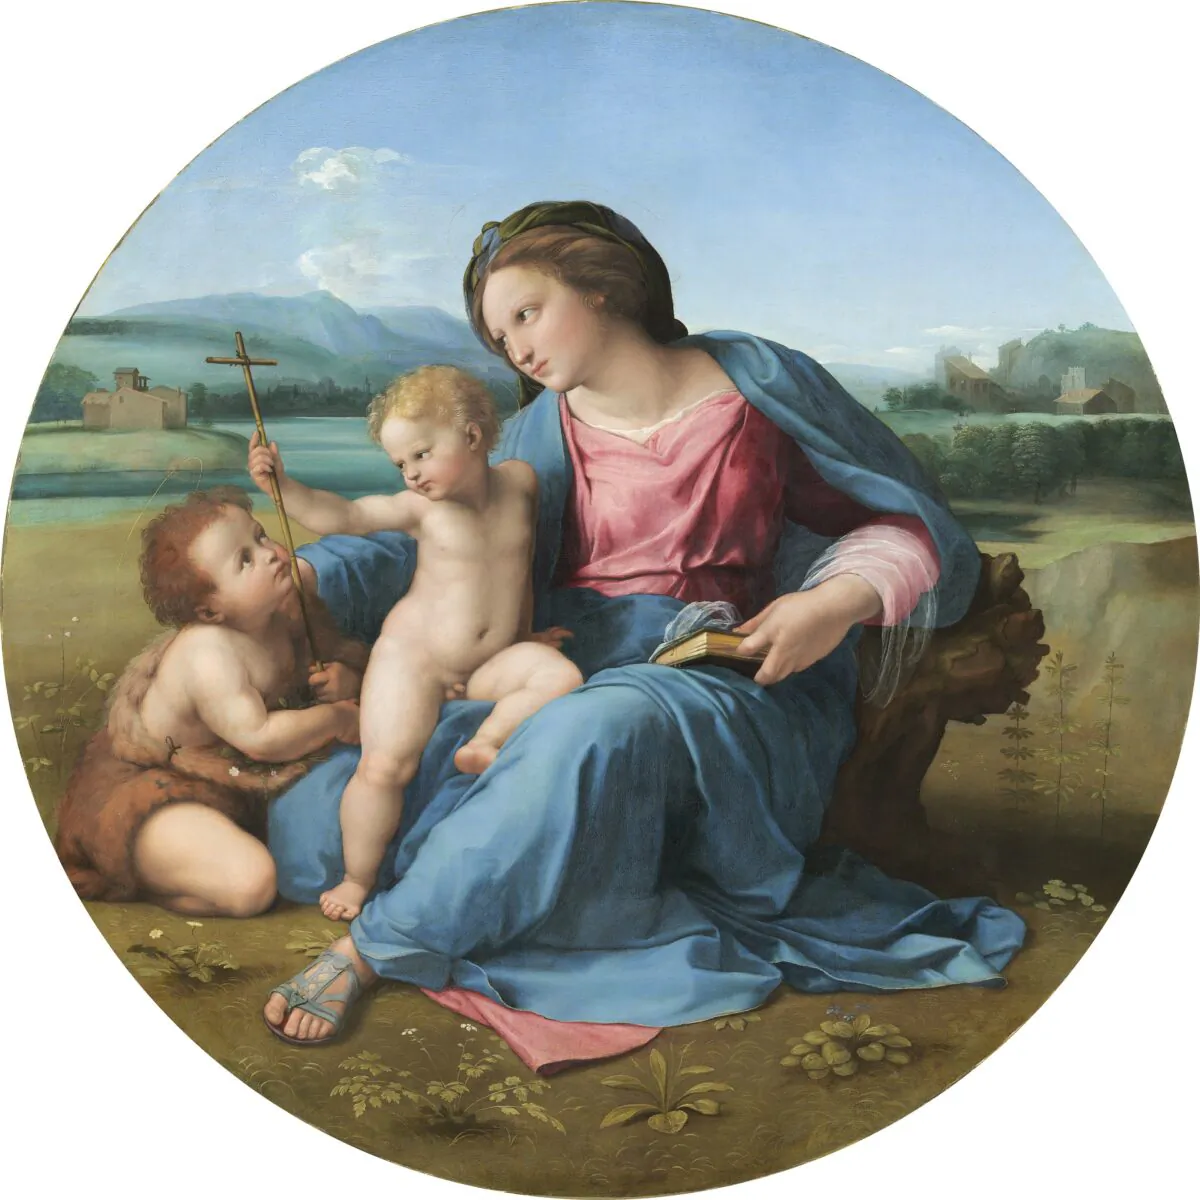 Detail from “The Alba Madonna,” circa 1510, by Raphael. Oil on panel transferred to canvas. Andrew W. Mellon Collection, National Gallery of Art, Washington. (National Gallery of Art, Washington)